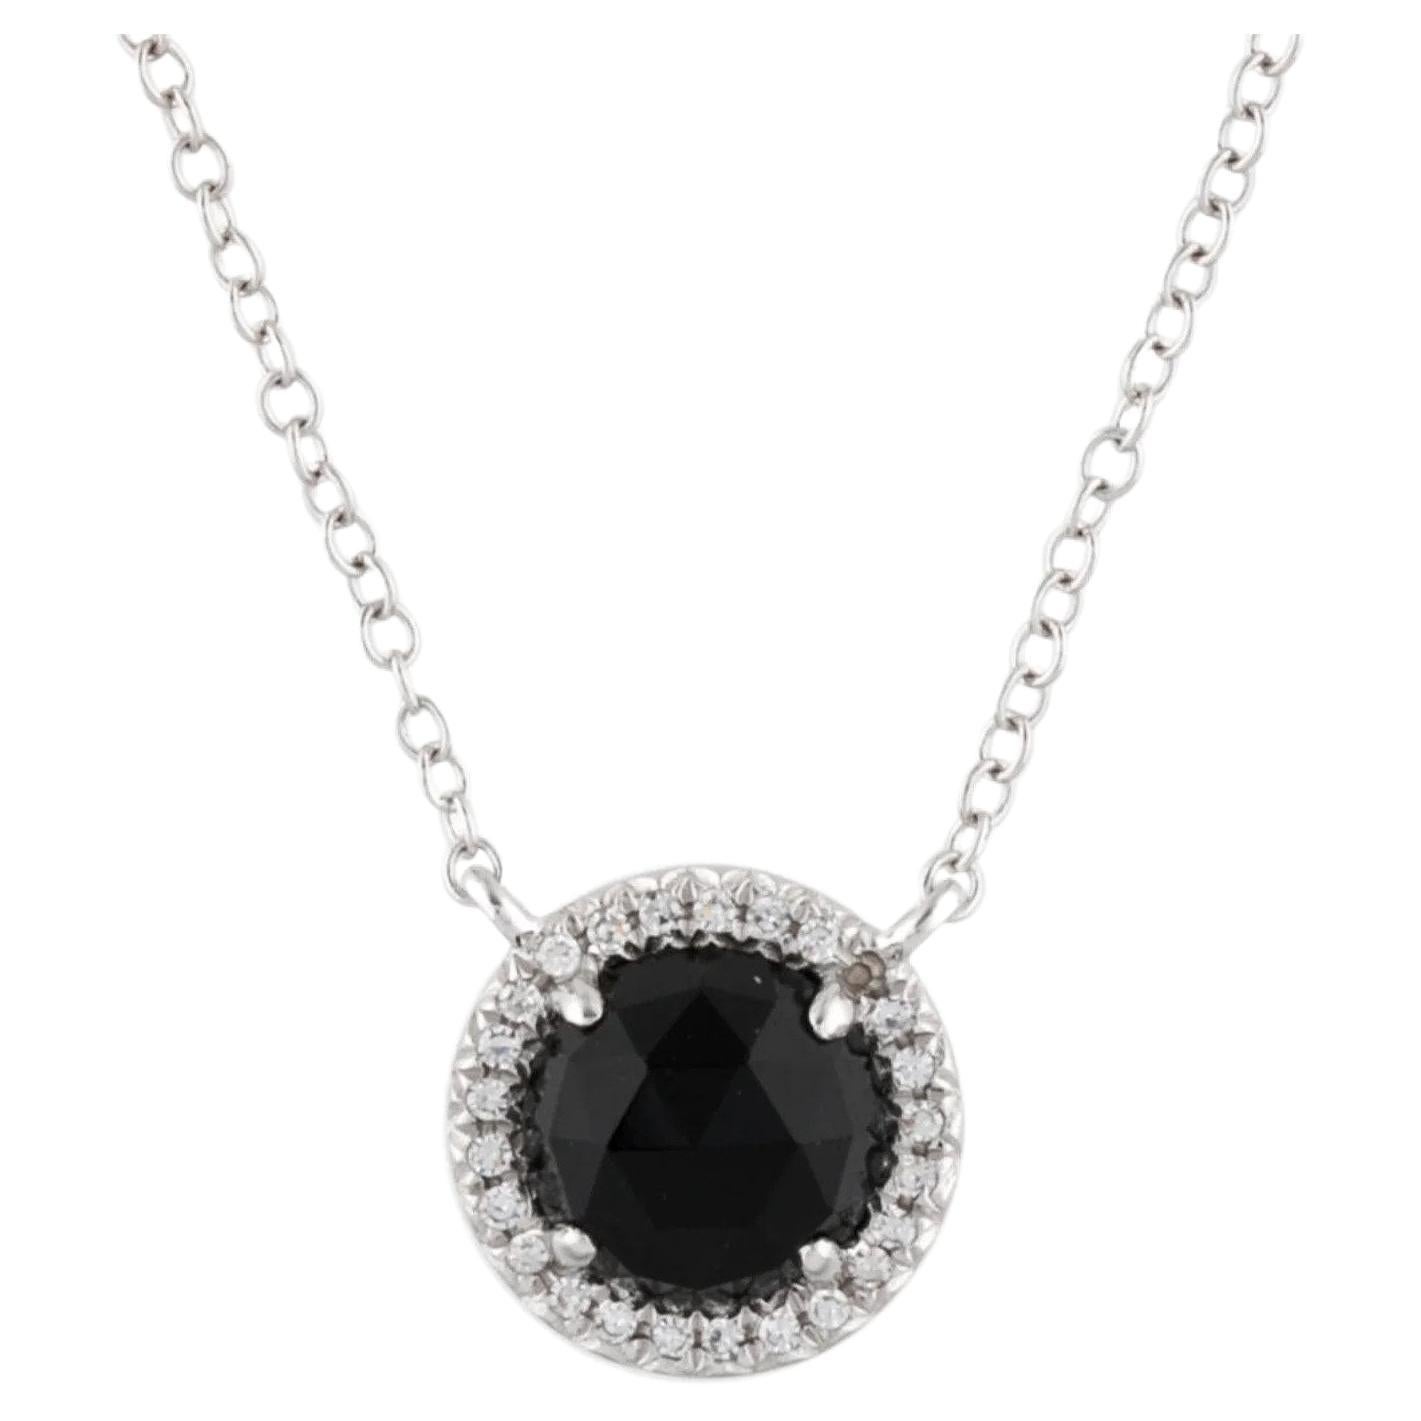 This Black Onyx & Diamond Pendant is a stunning and timeless accessory that can add a touch of glamour and sophistication to any outfit. 

This pendant features a 1.00 Carat Round Black Onyx, with a Diamond Halo comprised of 0.06 Carats of Single